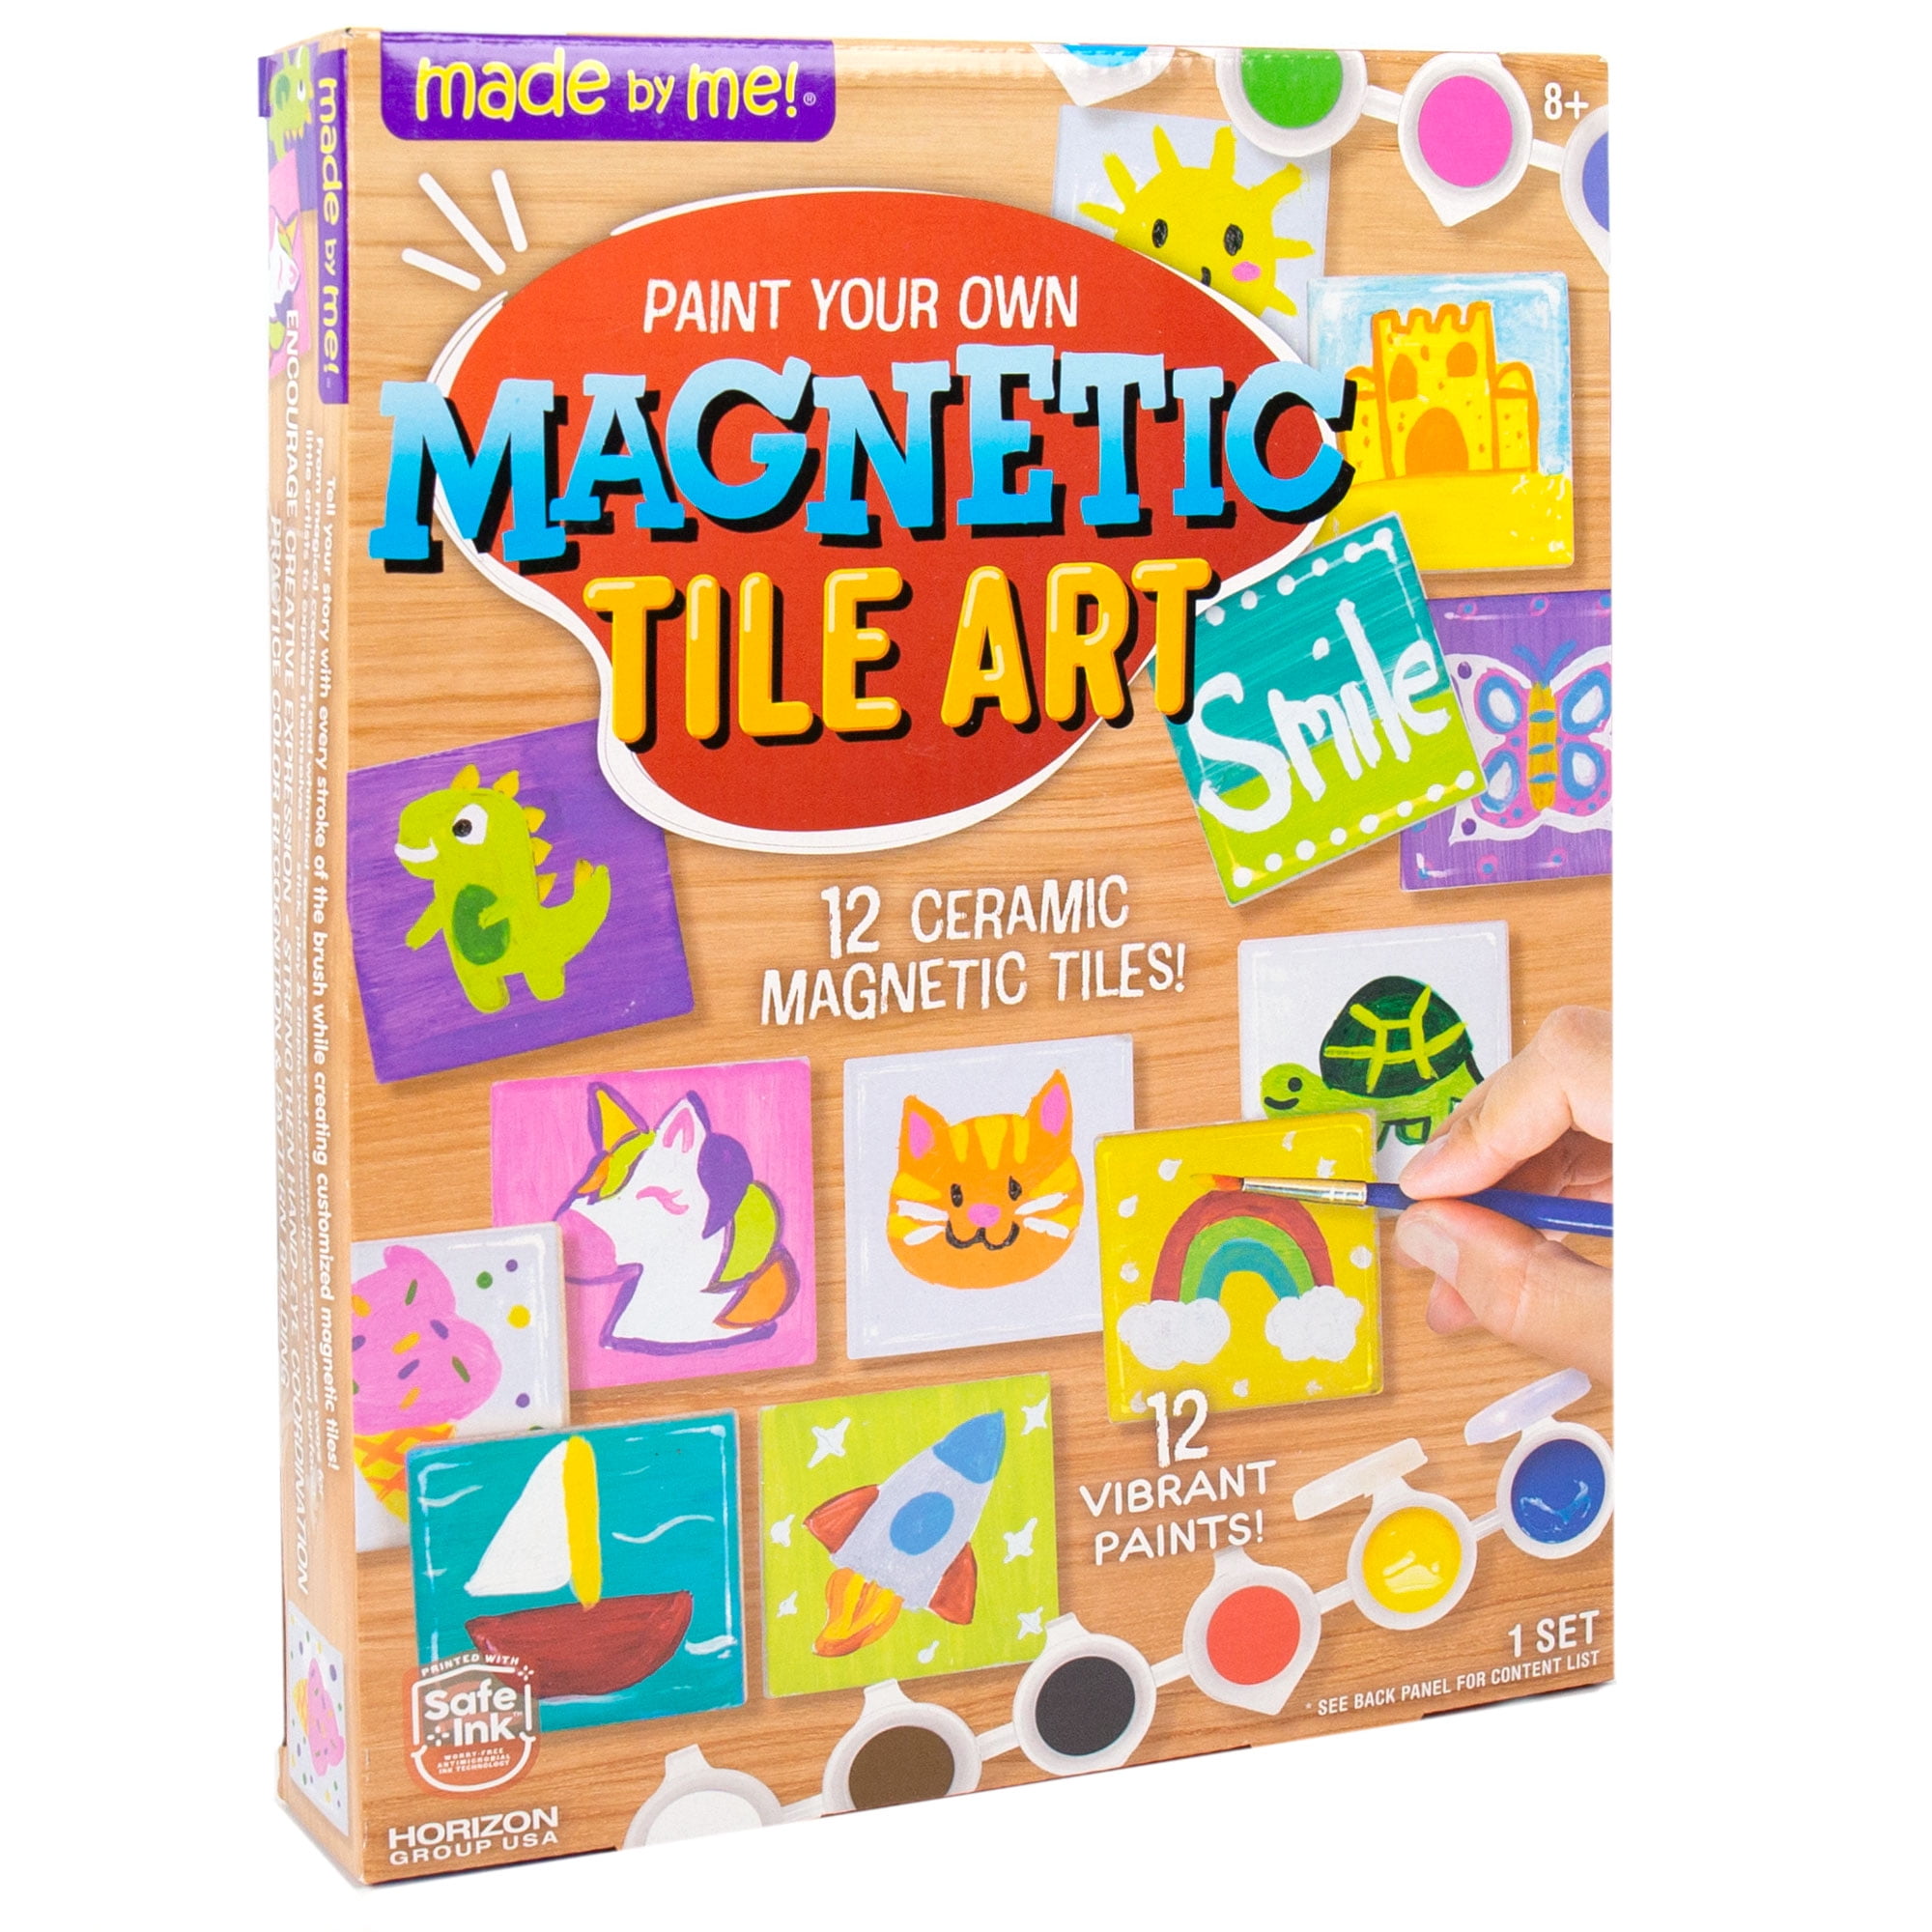 Made by Me Paint Your Own Magnetic Tile Art